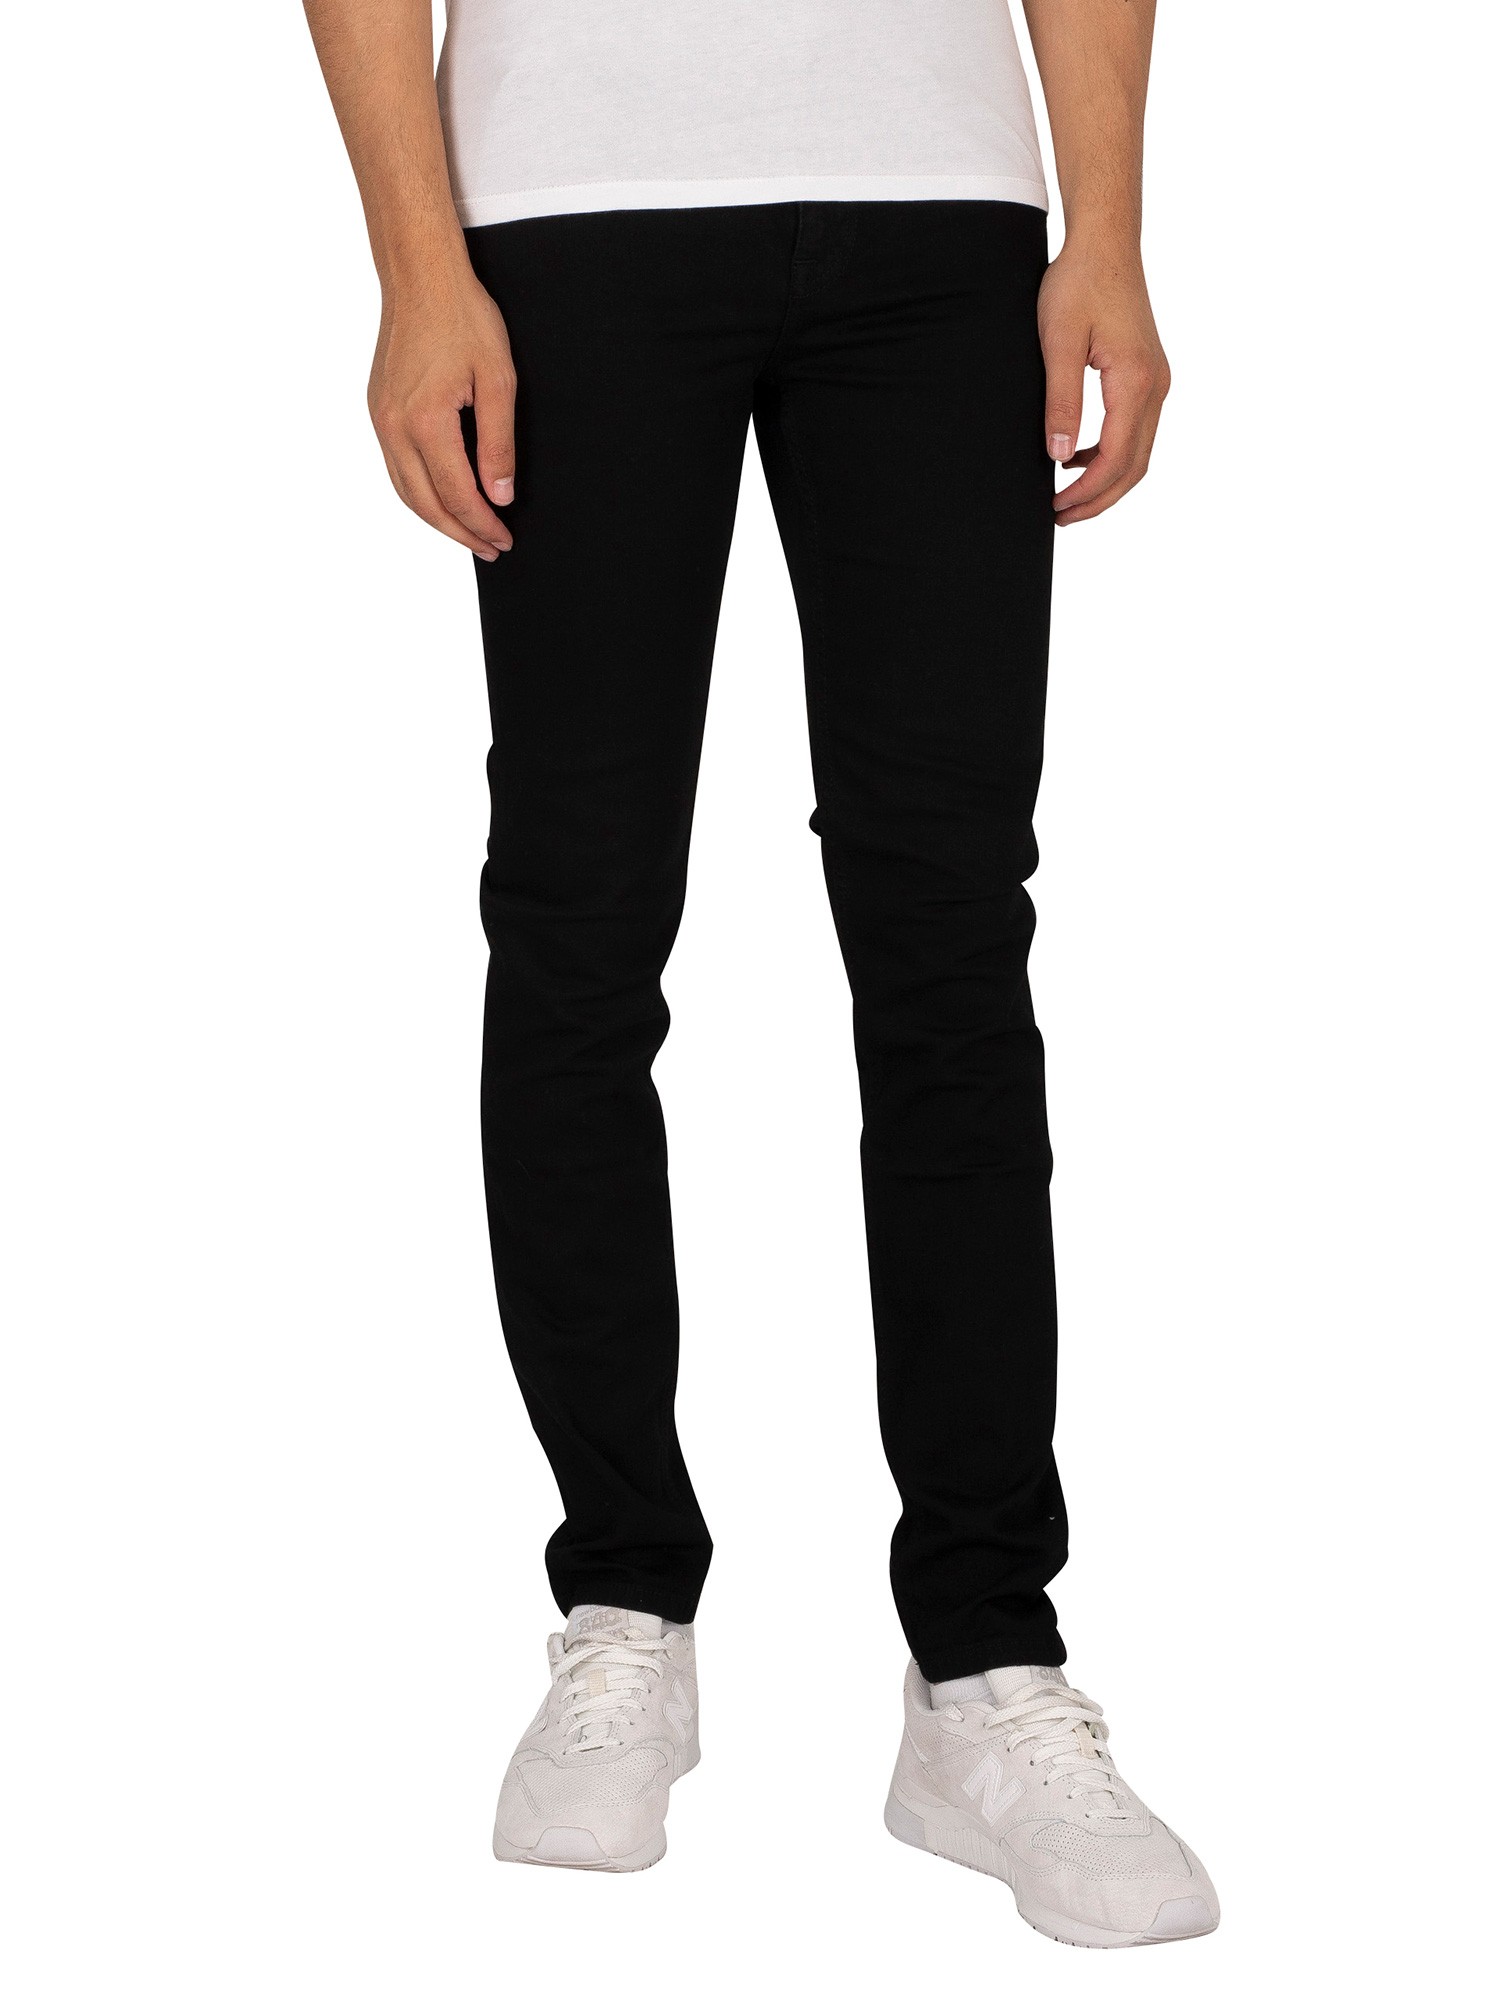 Chase Skinny Straight Jeans